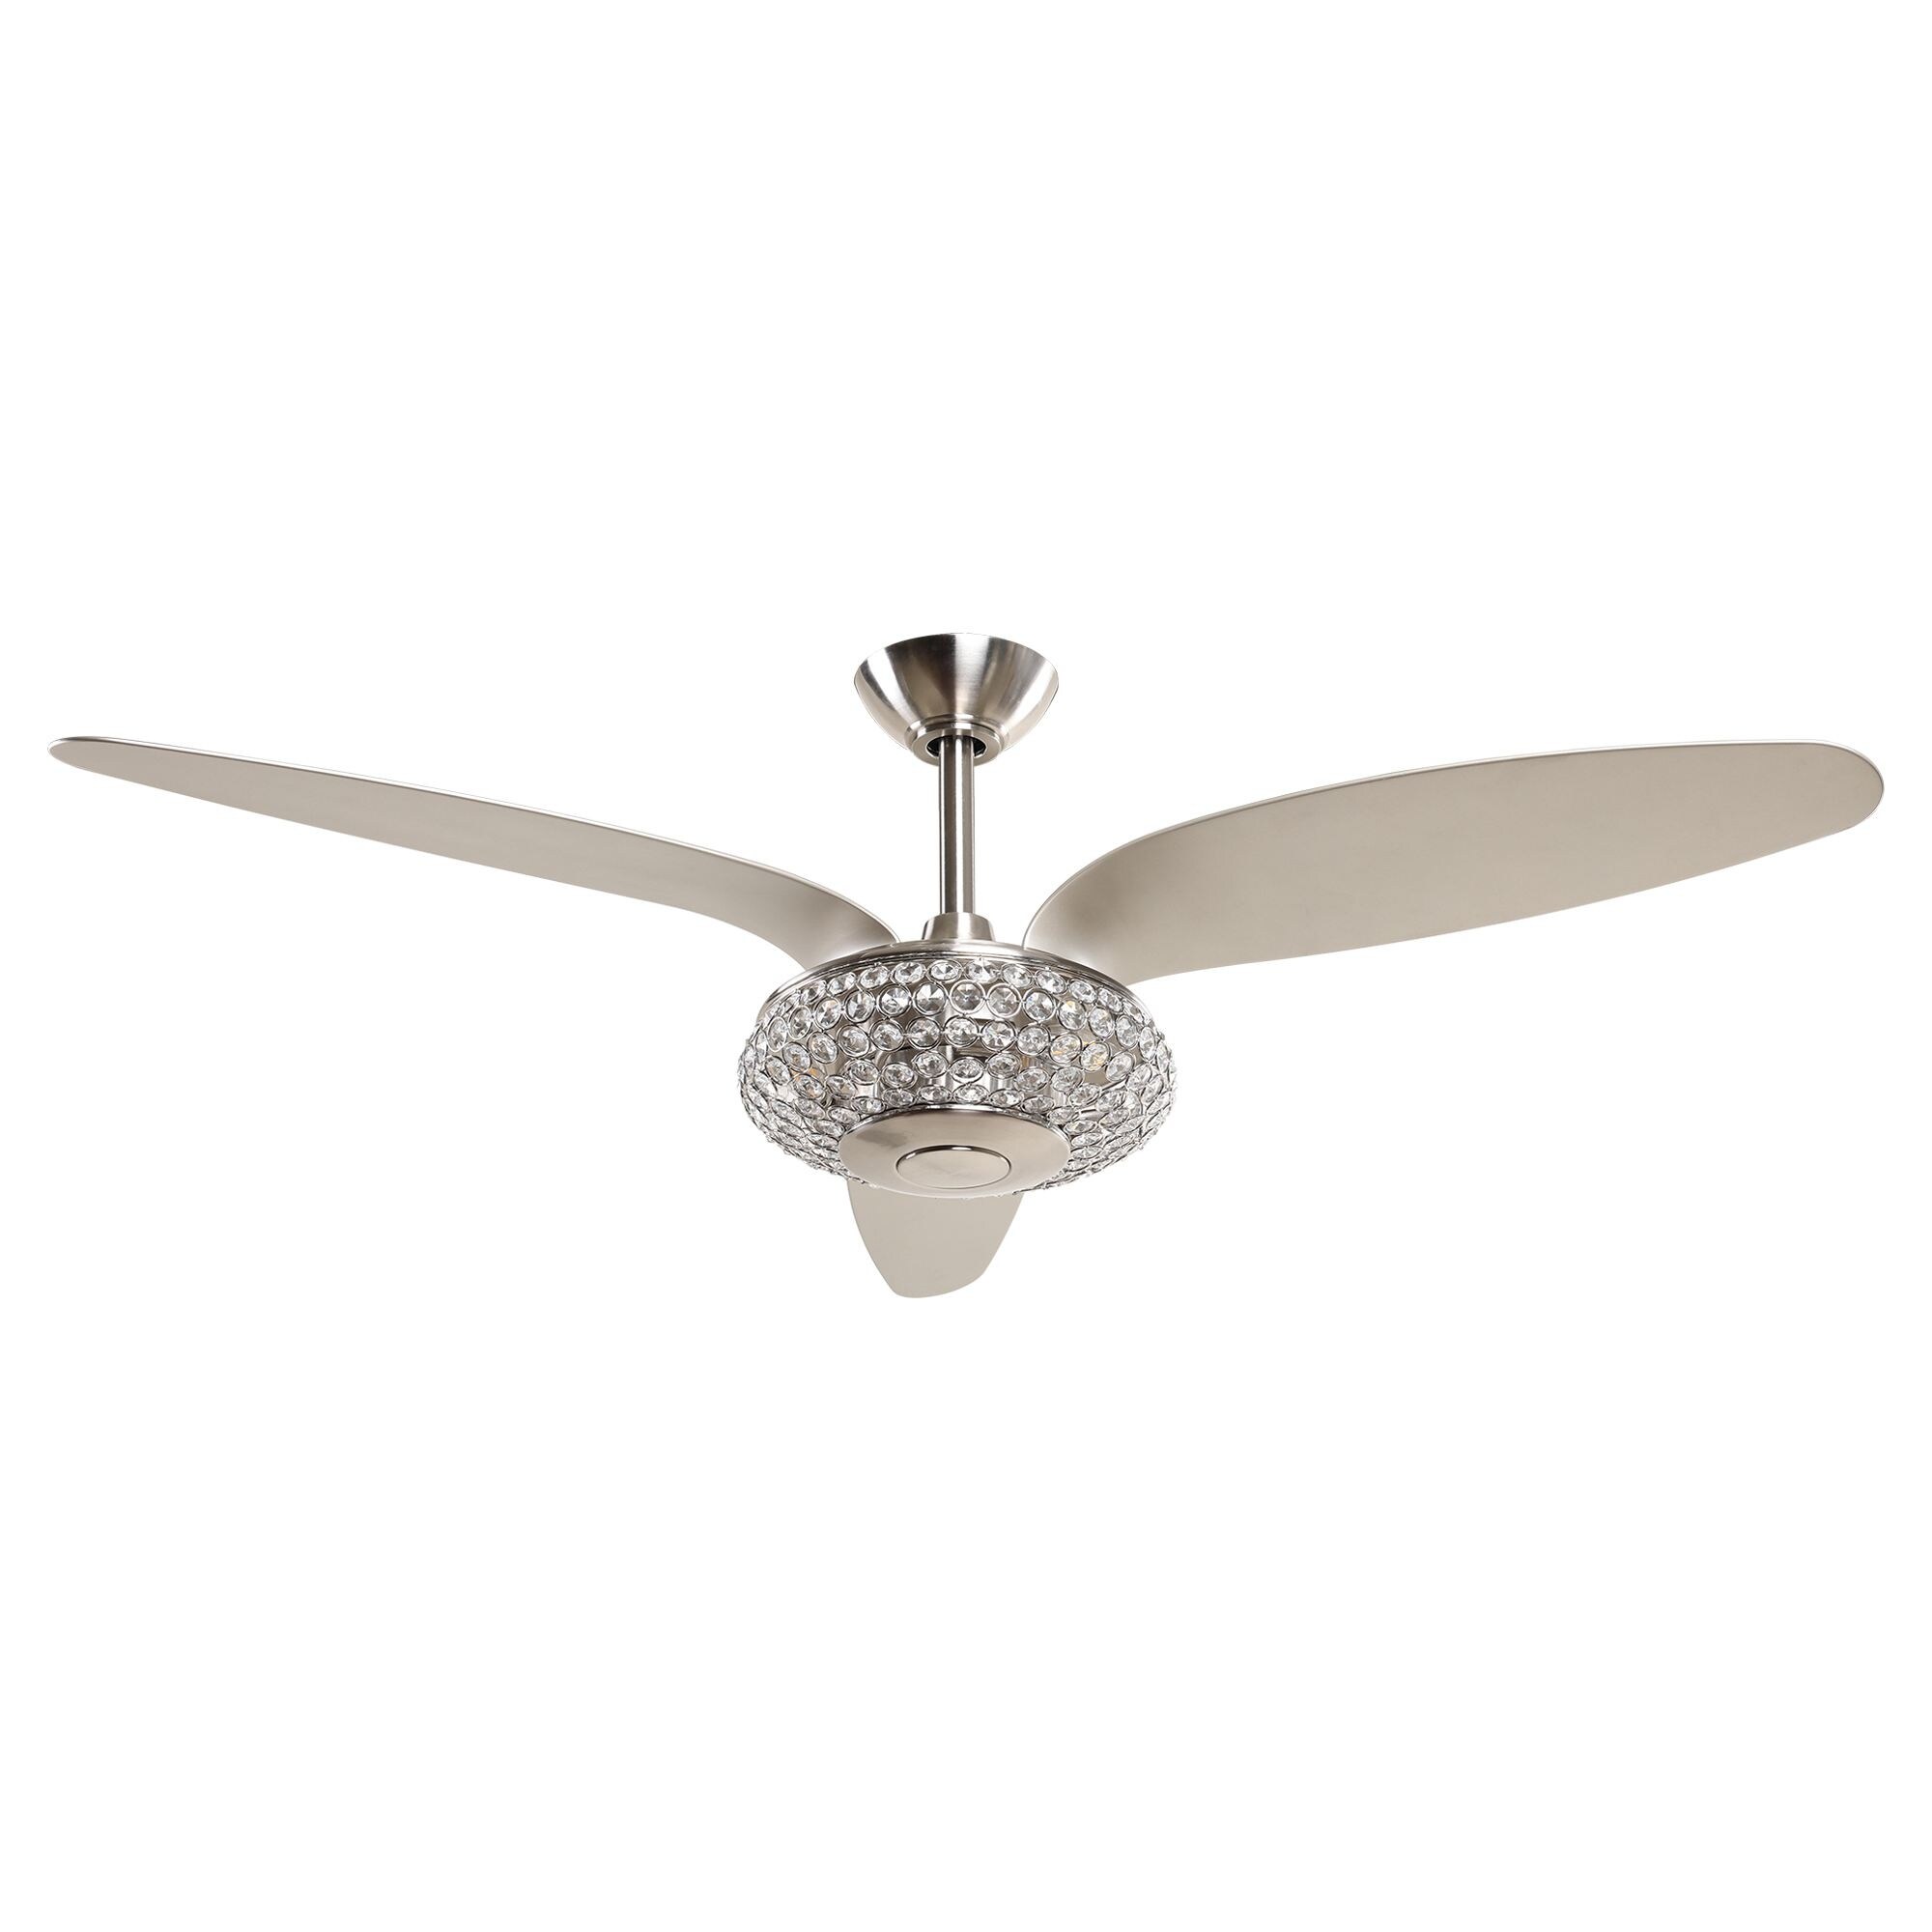 52" Modern 3-Blade Nickel Crystal LED Ceiling Fan with Remote